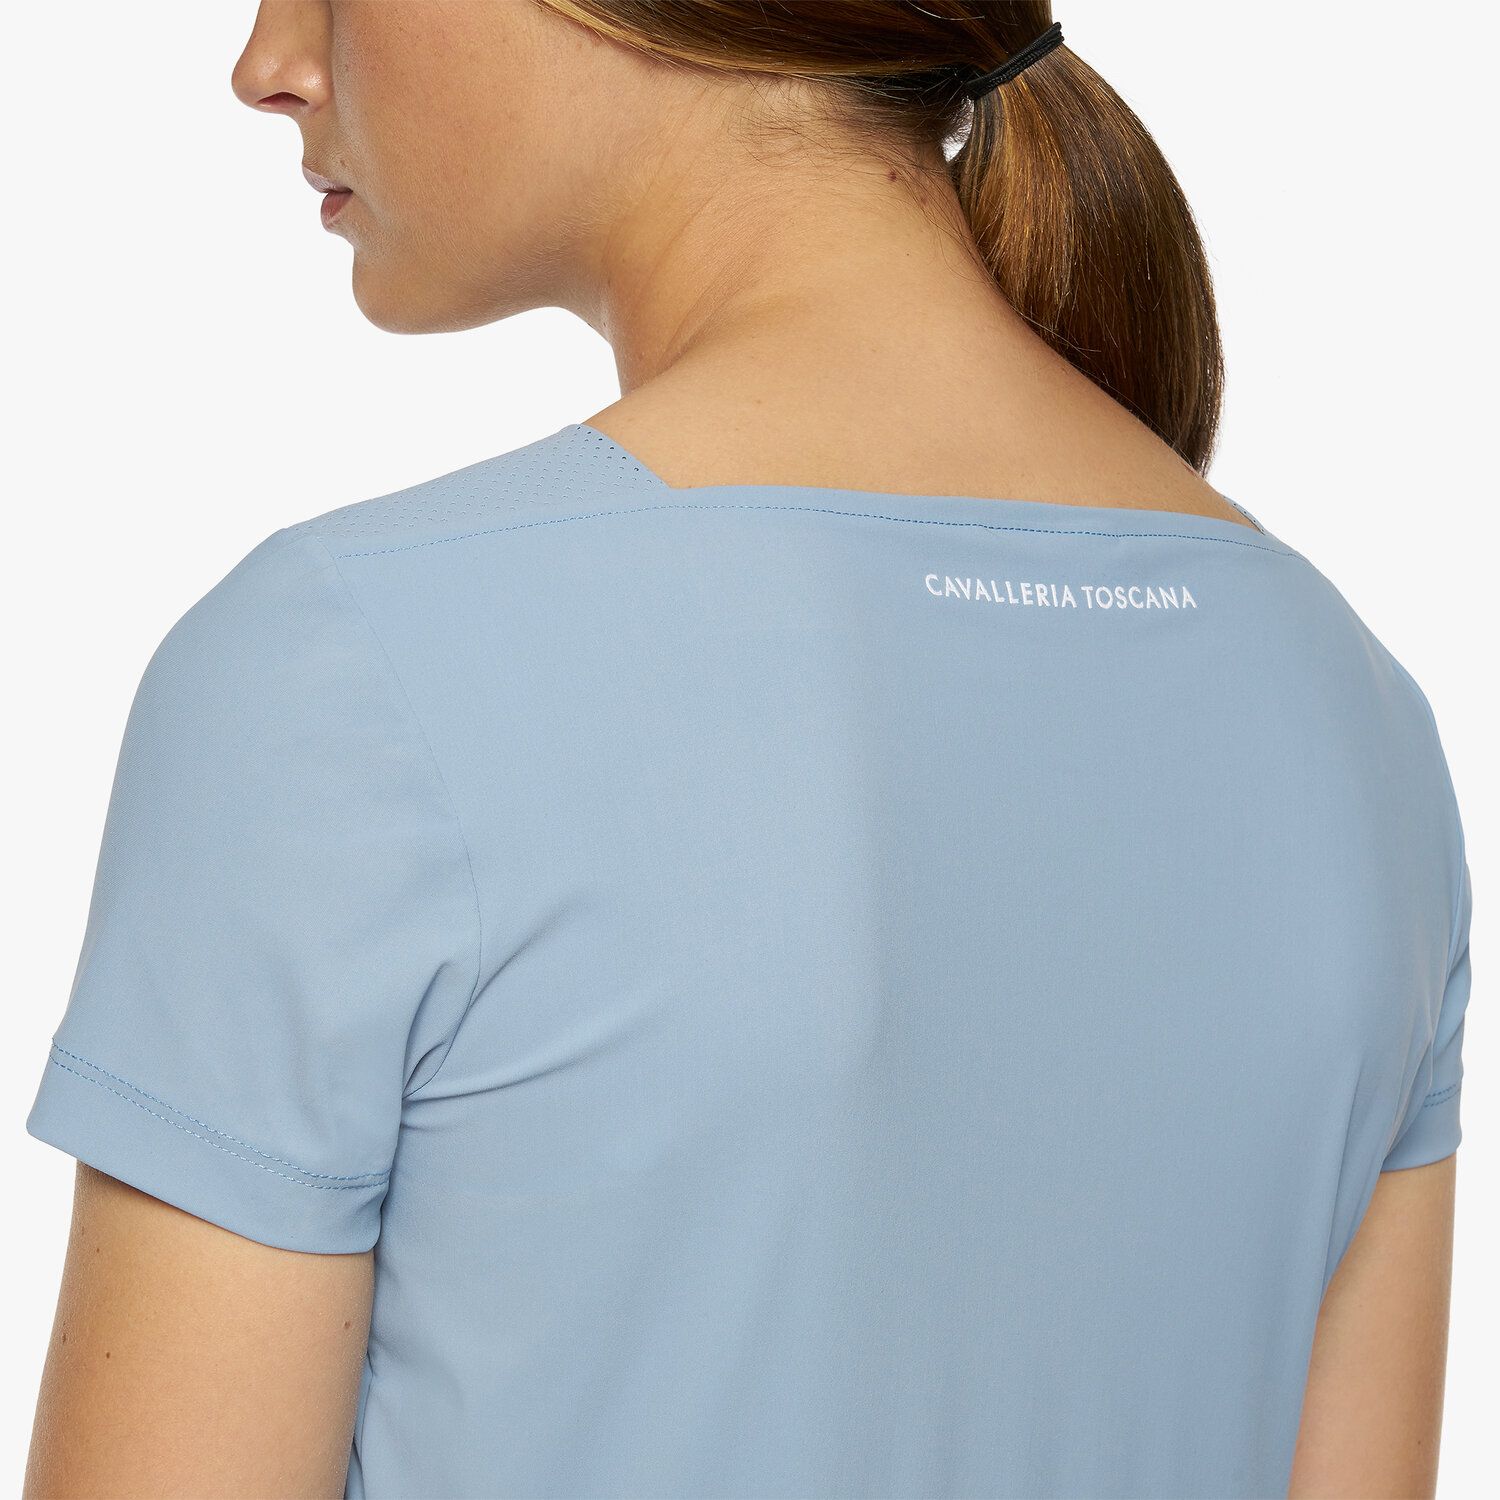 Cavalleria Toscana Women’s jersey t-shirt with perforated details Light blue-4